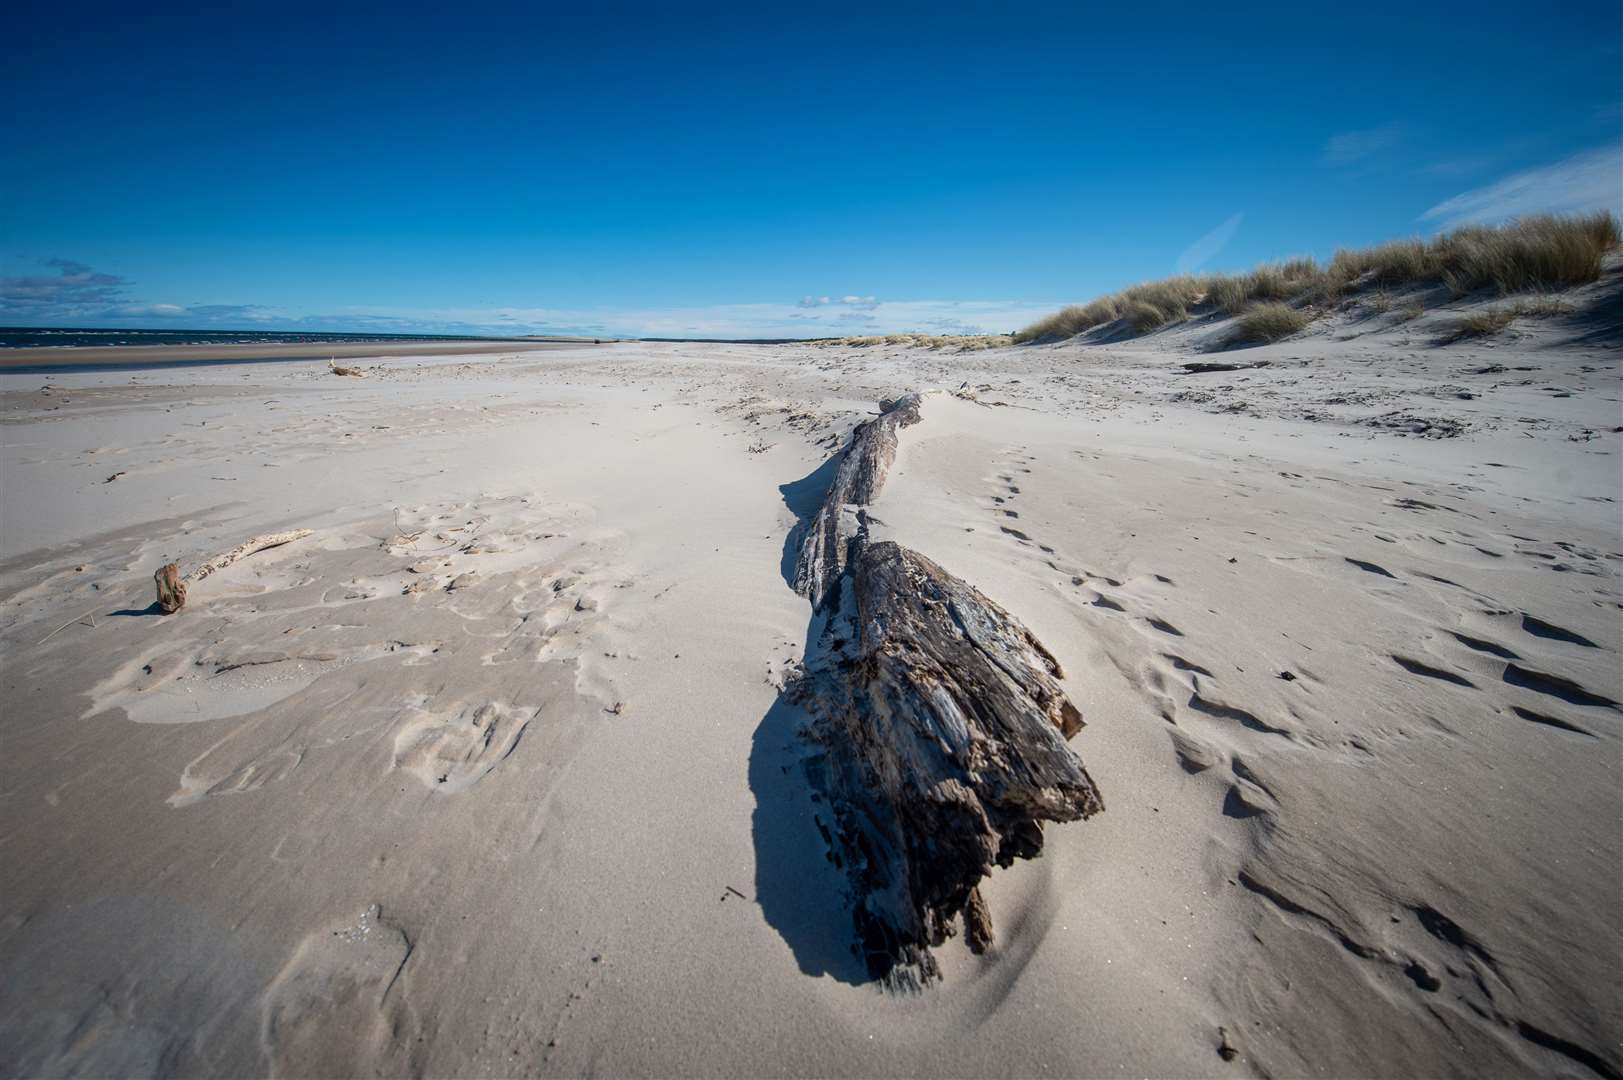 The dunes at Nairn Beach. Picture by: Callum Mackay.